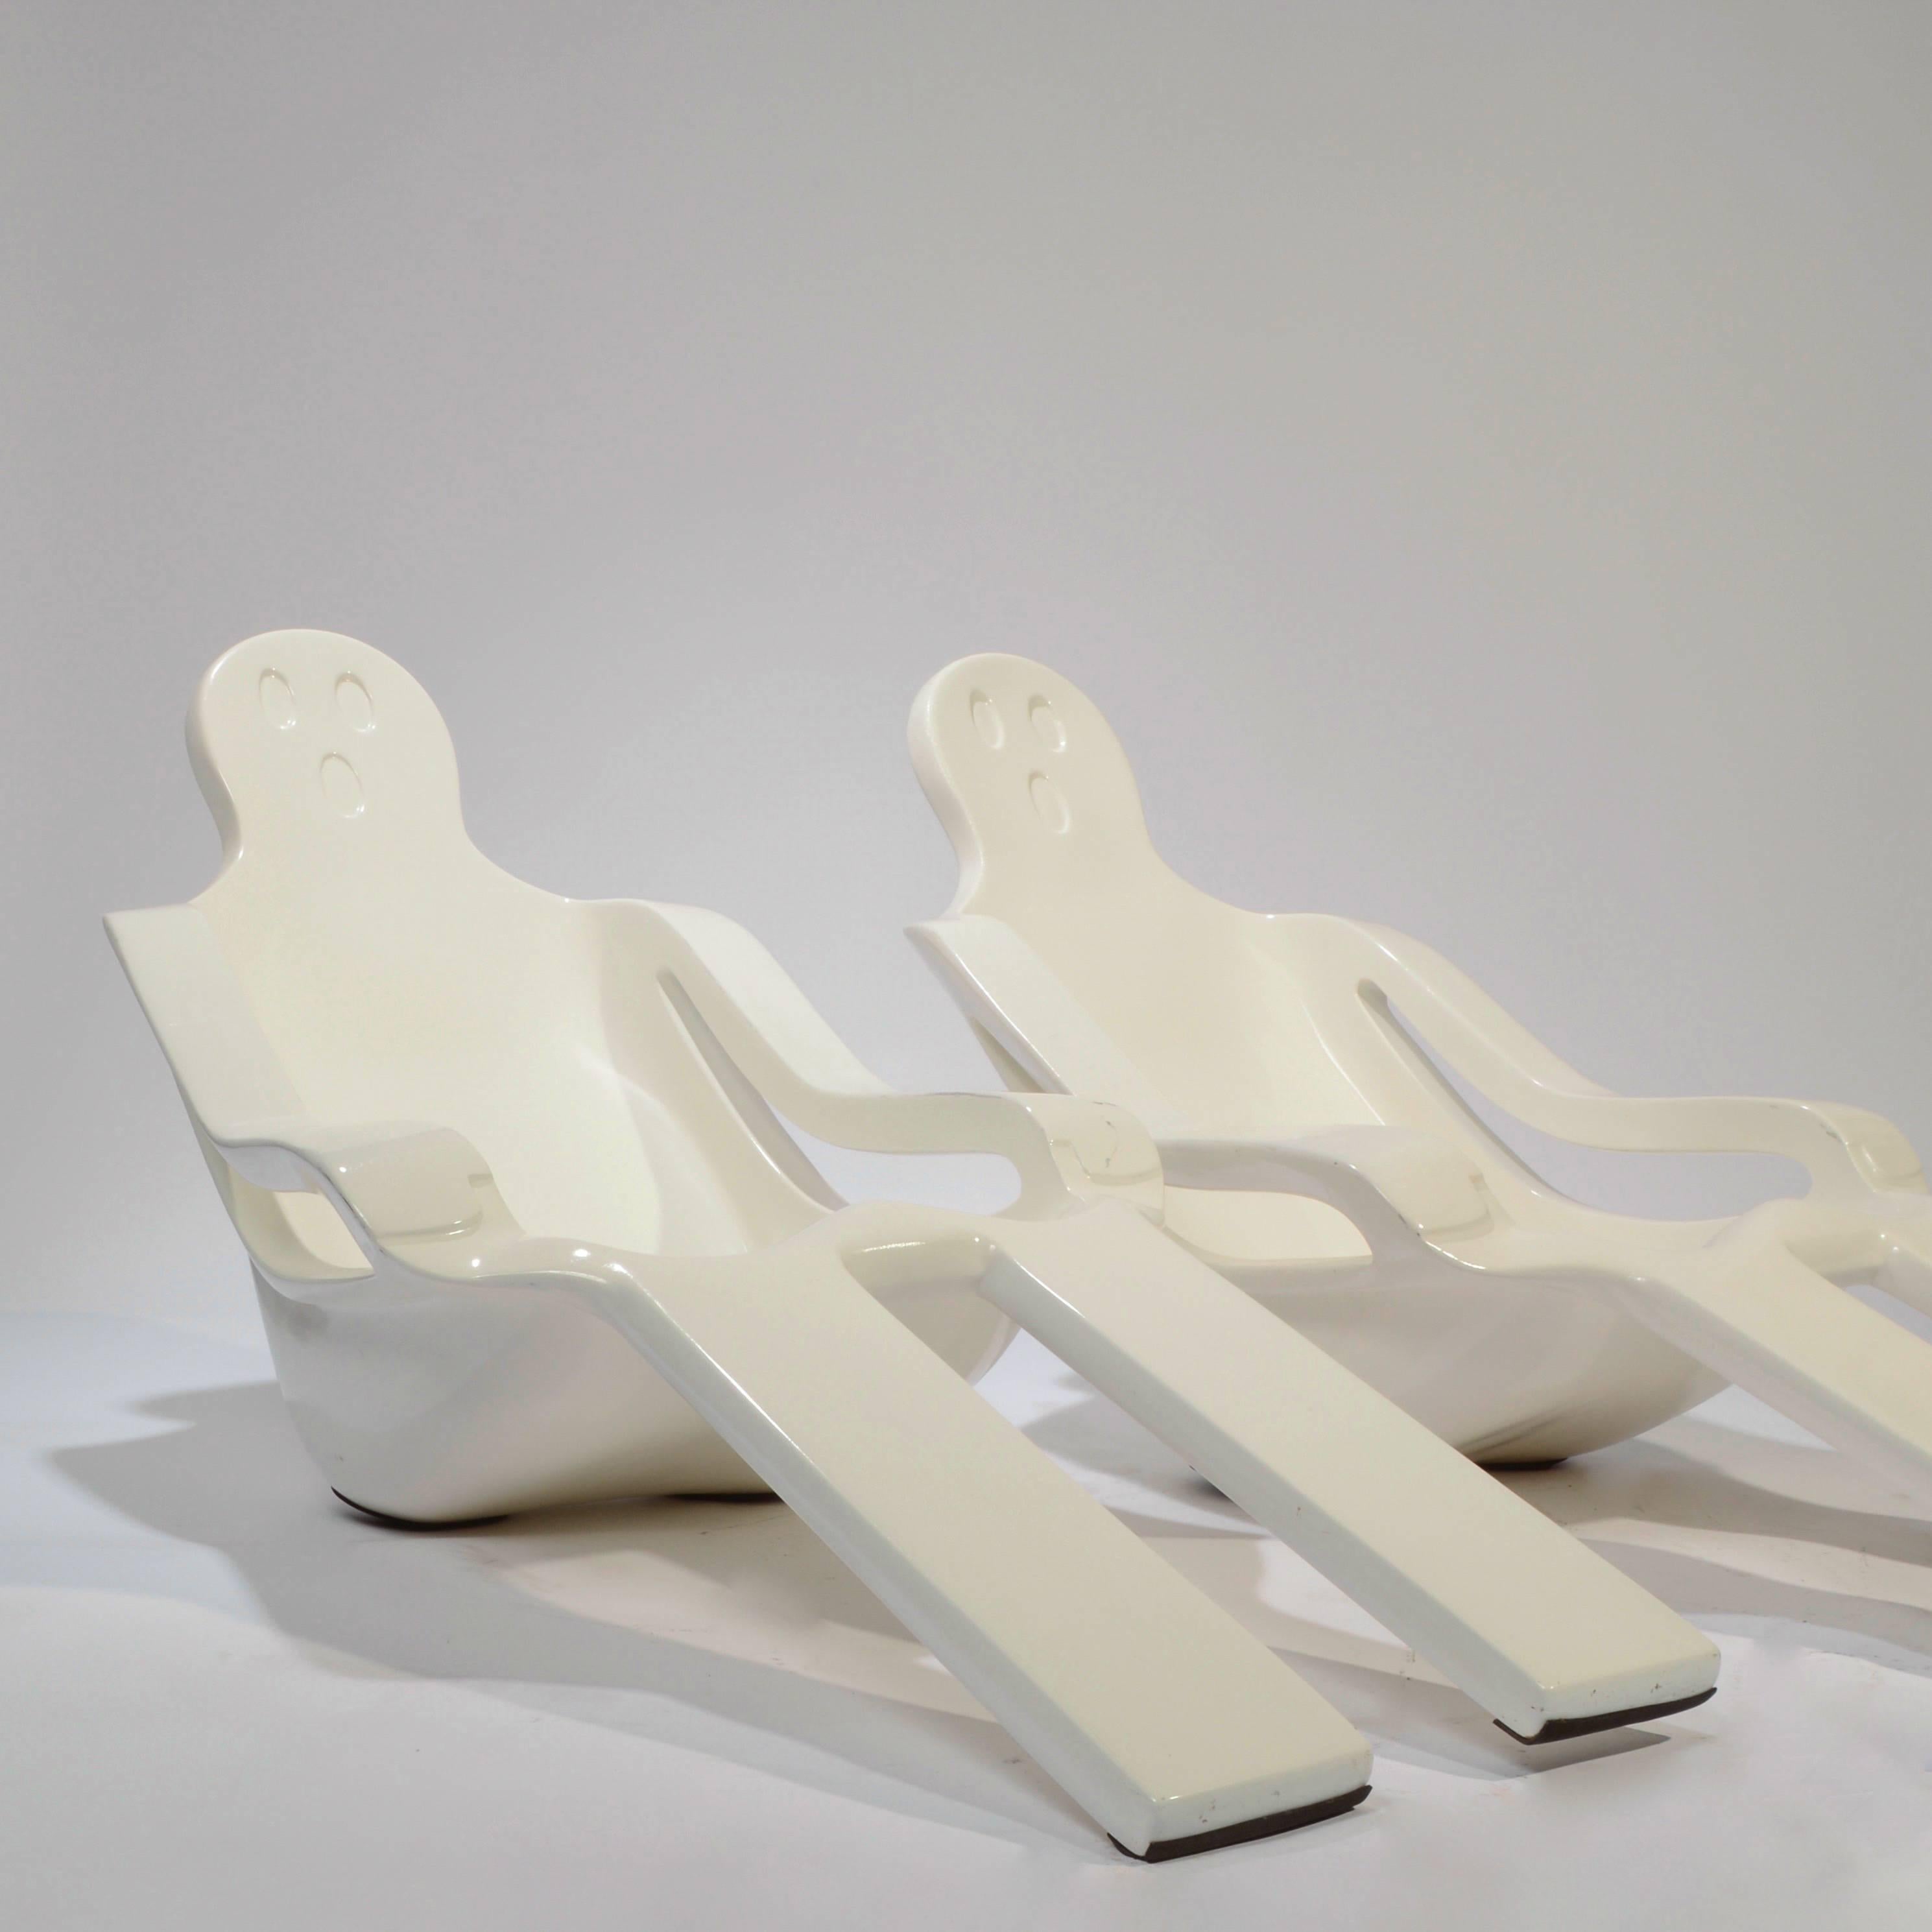 Transform any poolside with these whimsical anthropomorphic modern art chaise longue chairs in fiberglass. These chairs were custom-made for a high end Mexico city hotel, circa 1970.